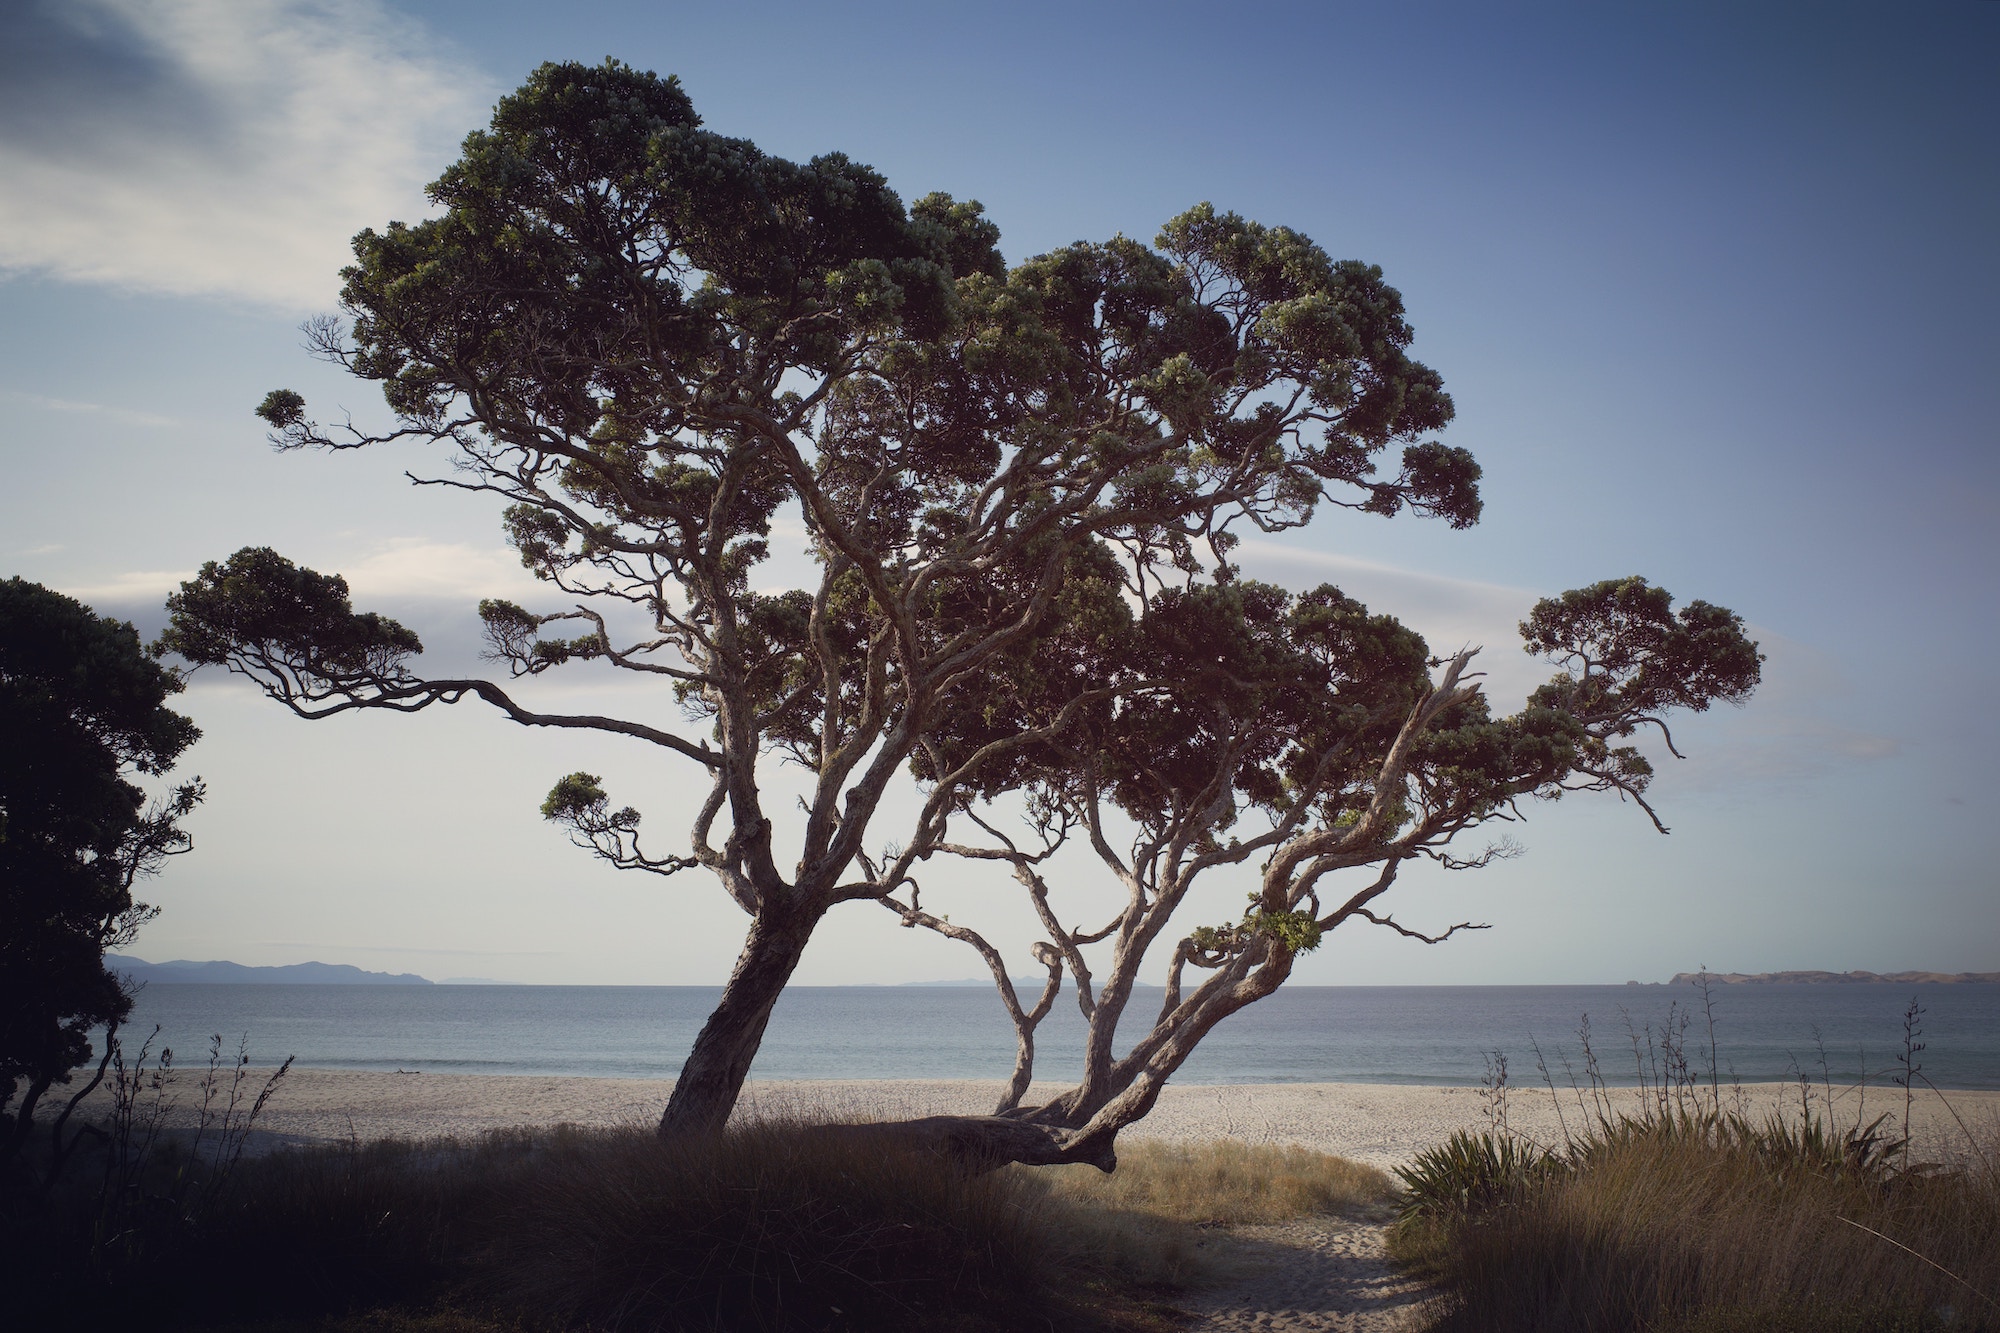 image from Responsive Images: Pōhutukawa tree example